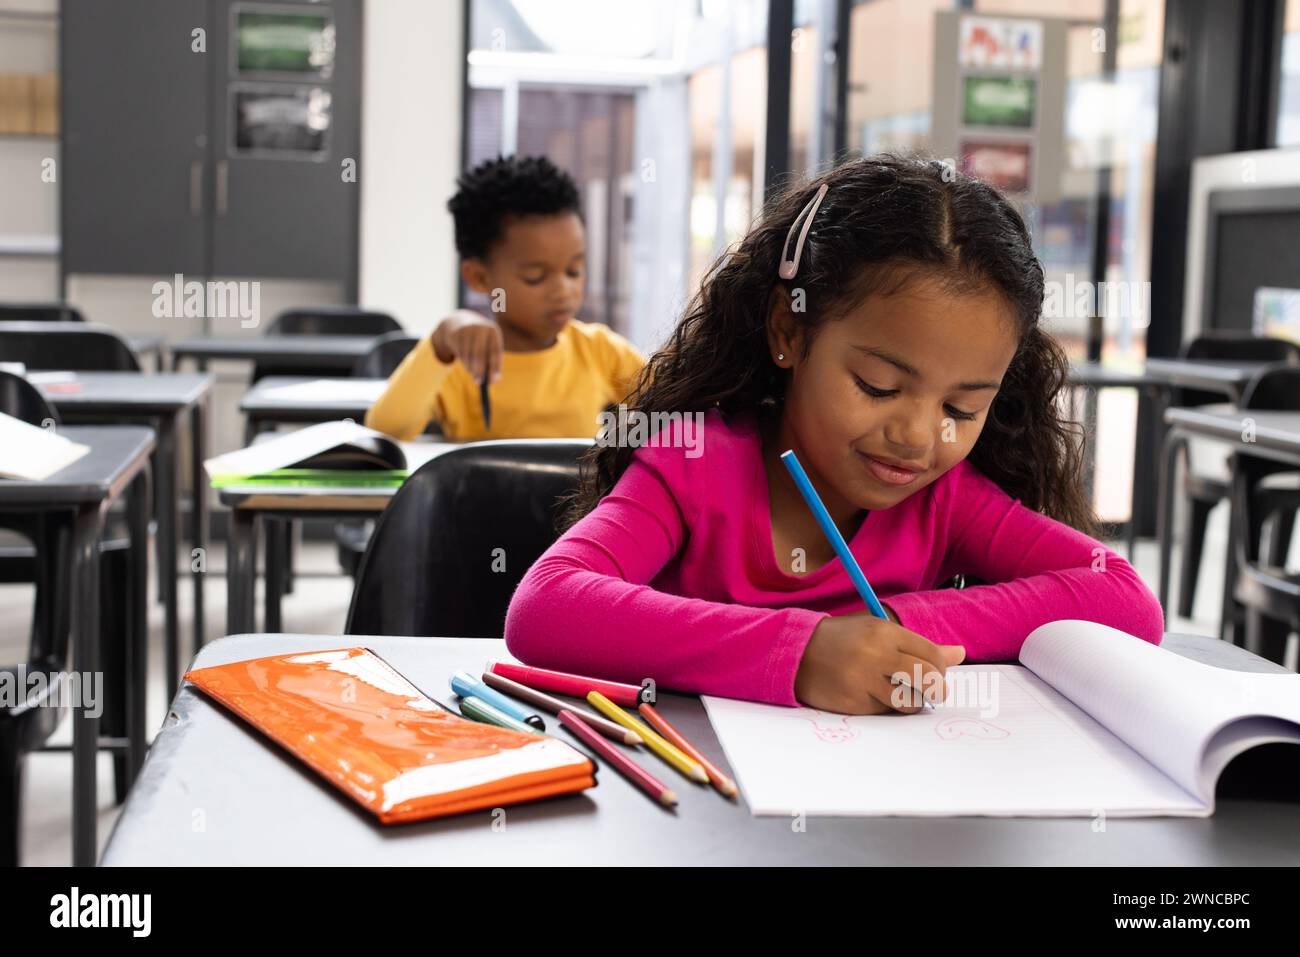 Biracial girl with curly brown hair is in a school classroom, African American boy in the background Stock Photo